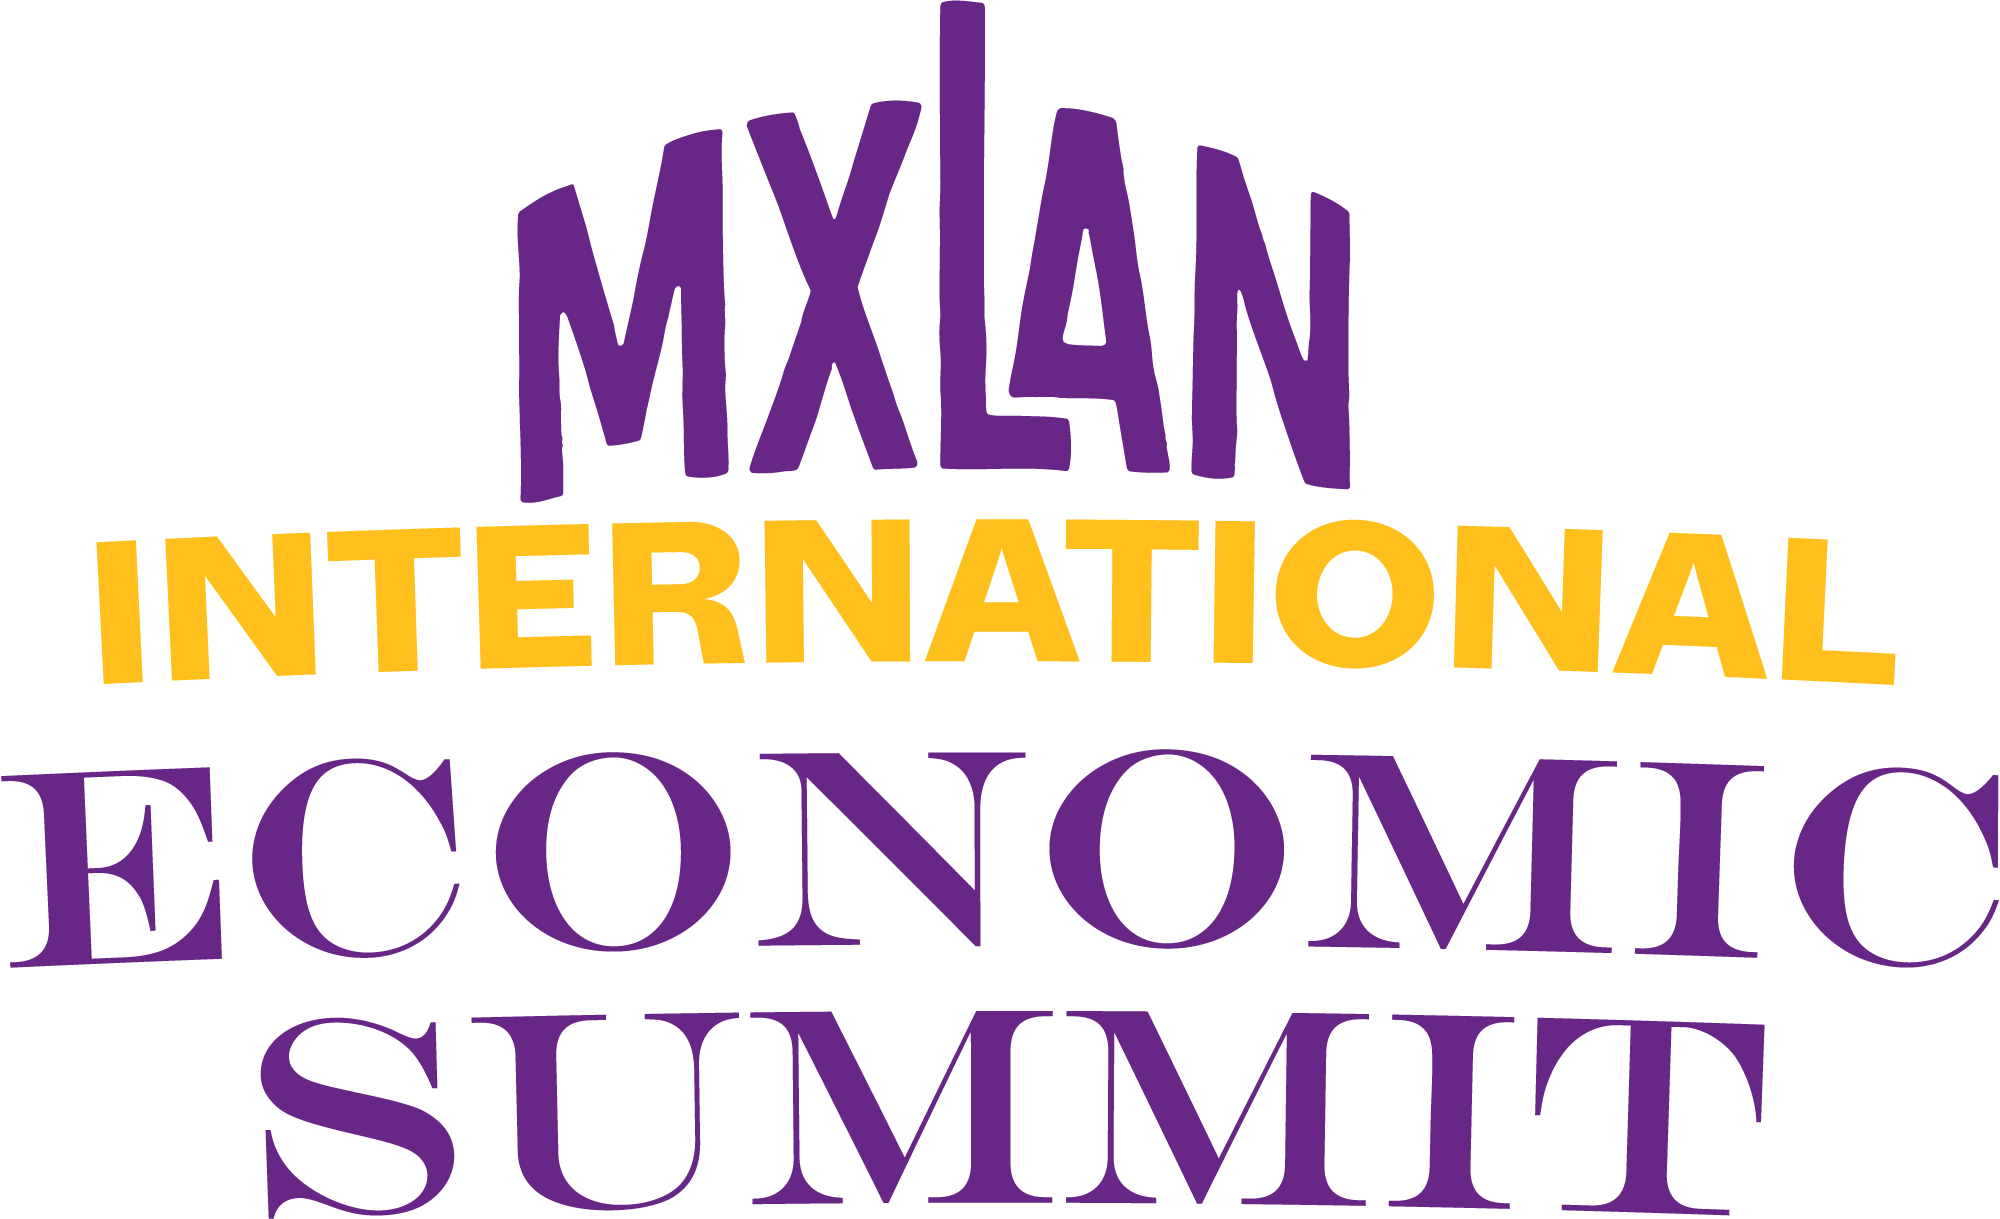 mxlan international economic summit festival creator in motion mcallen latino latinx music arts best fesitval in texas acl south by south west coachella rio grande valley south padre island brownsville indie best latino festival in us breakthrough stage